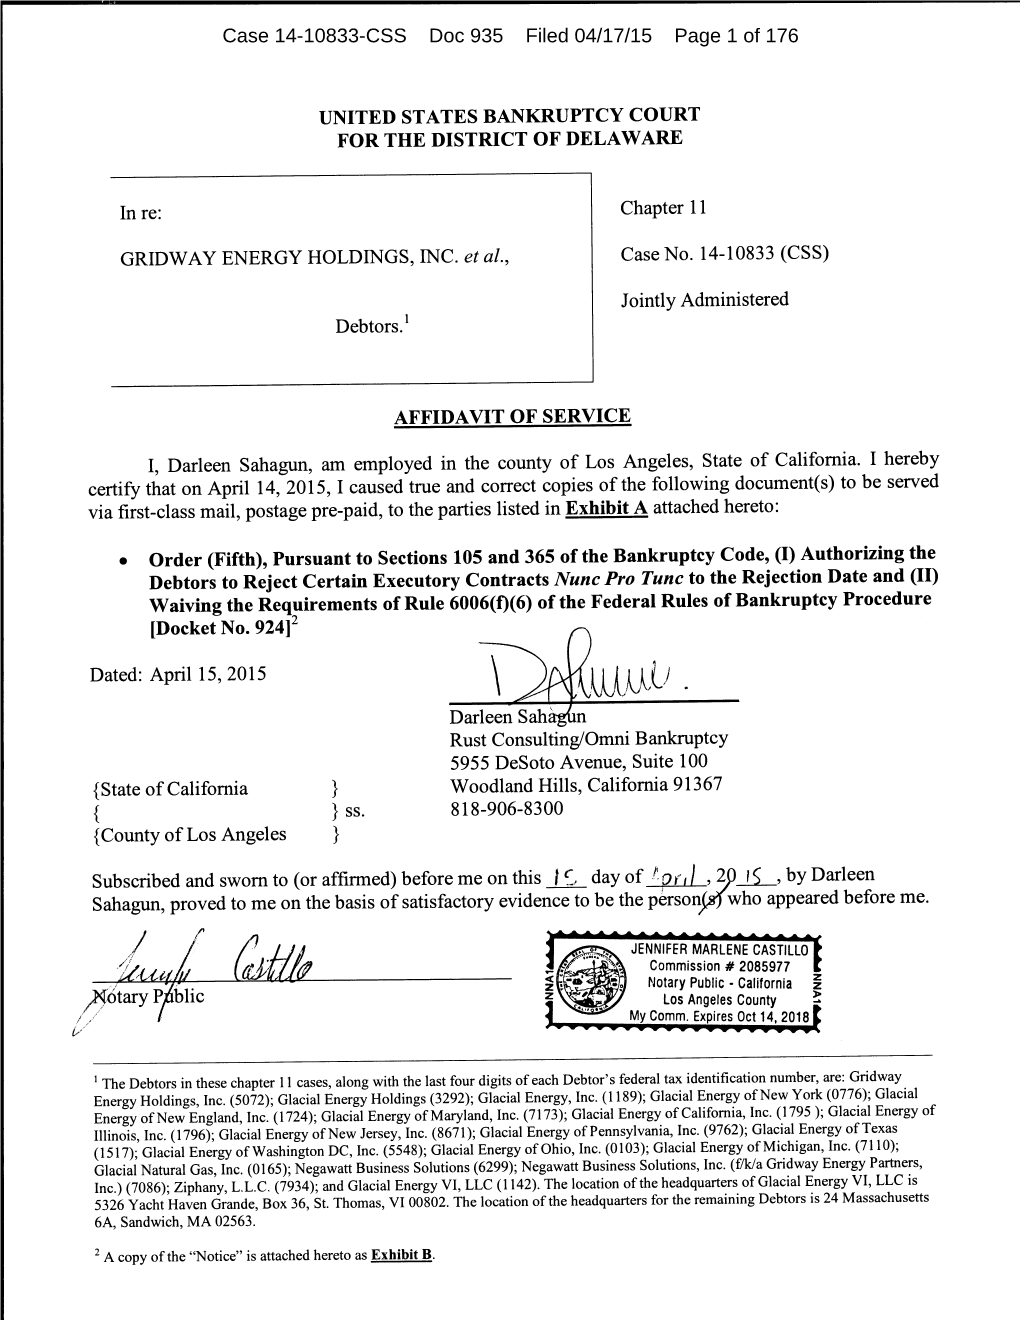 Case 14-10833-CSS Doc 935 Filed 04/17/15 Page 1 of 176 Case 14-10833-CSS Doc 935 Filed 04/17/15 Page 2 of 176